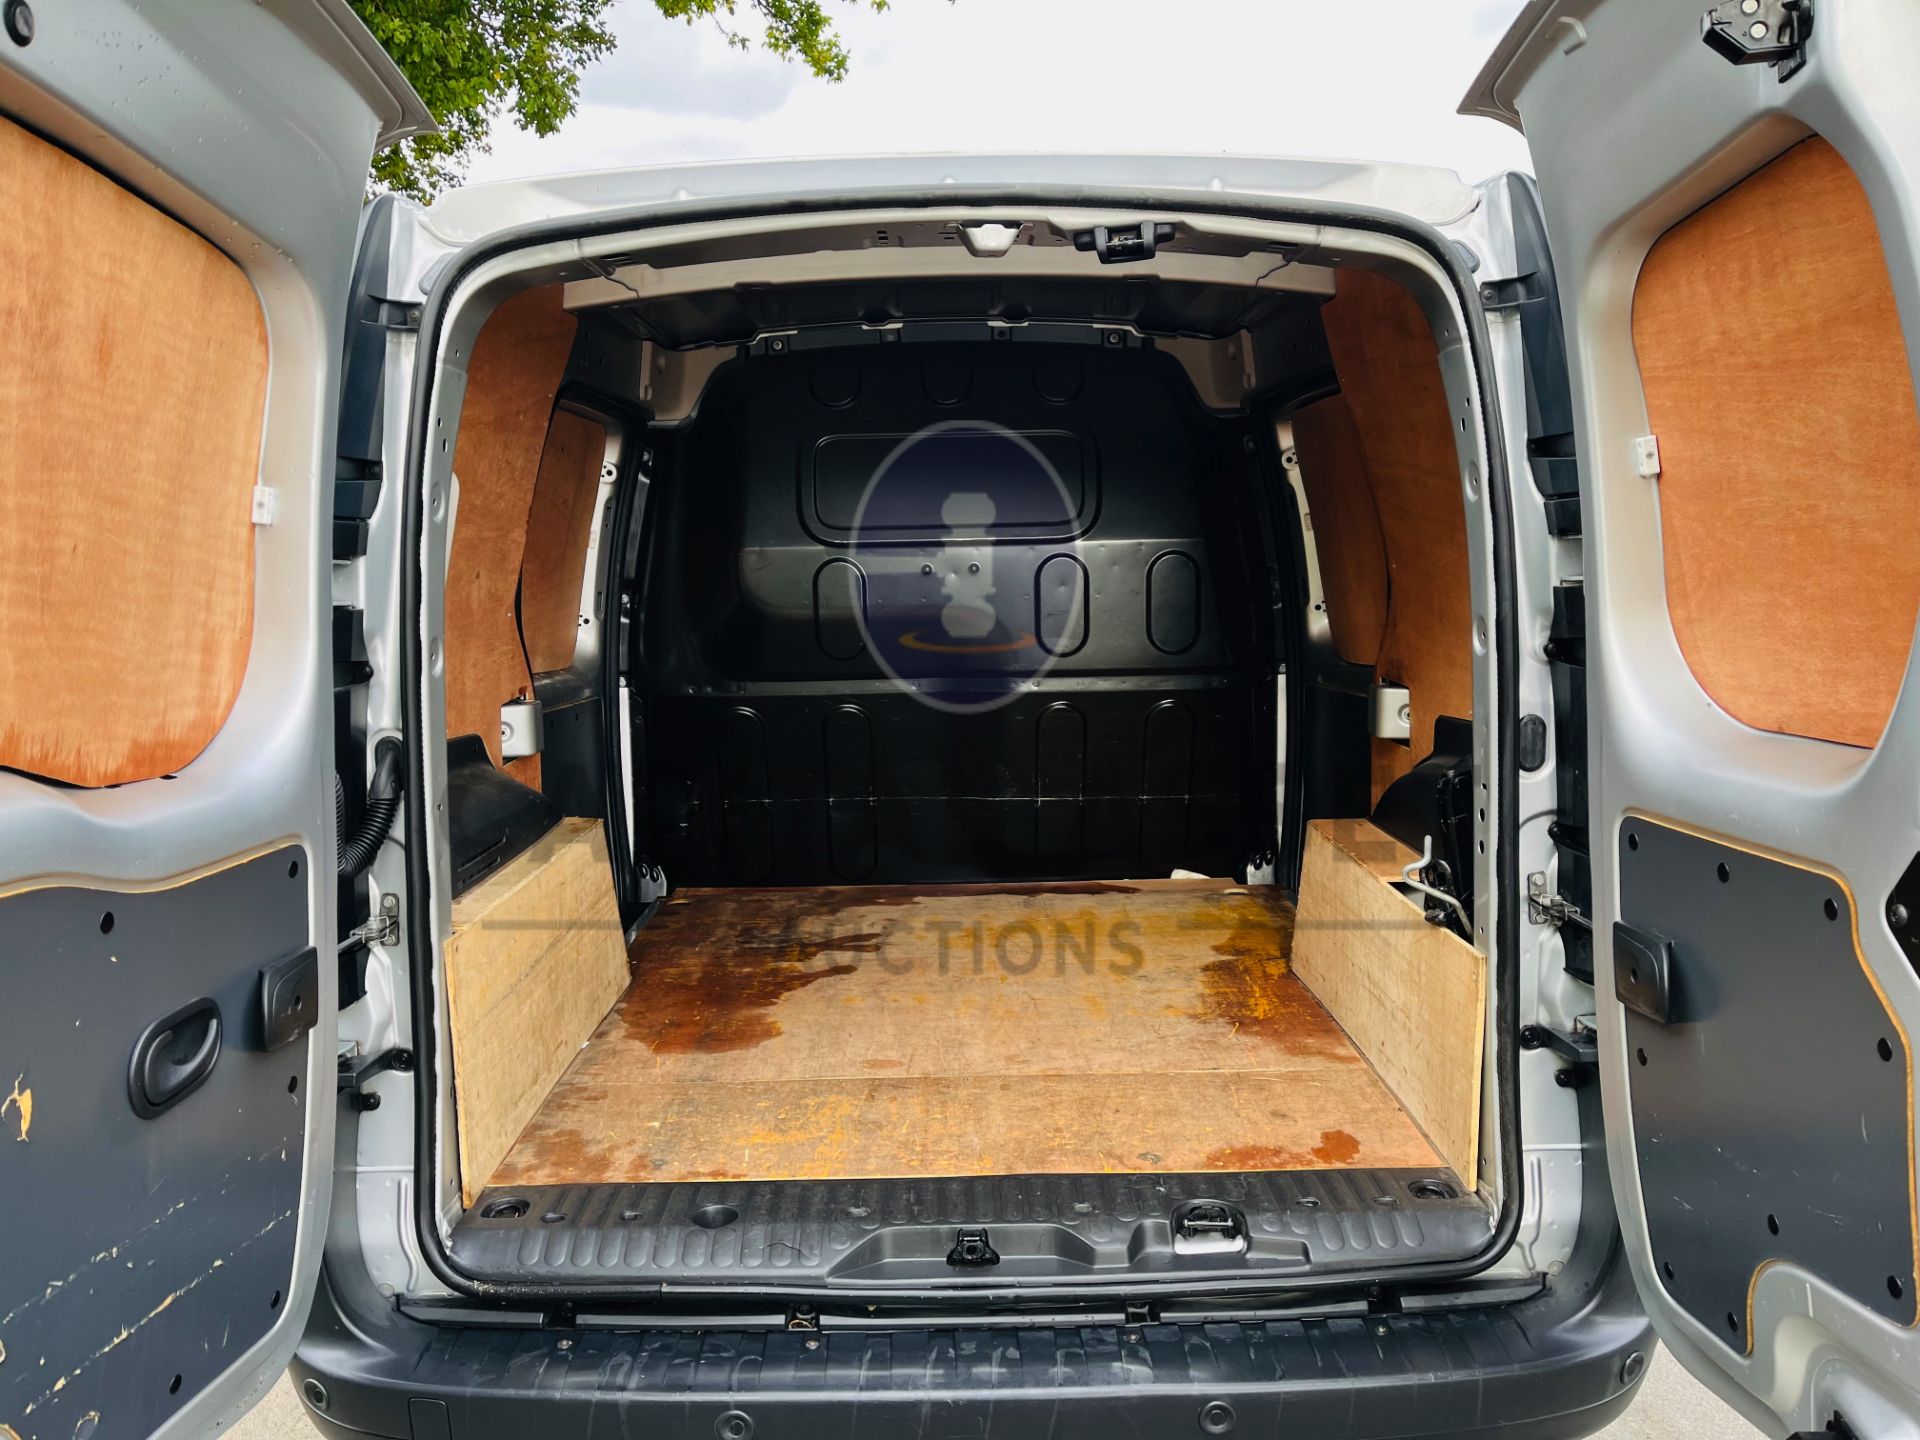 RENAULT KANGOO 1.5DCI "BUSINESS EDITION" (2018) EURO 6 - 6 SPEED - AIR CON - STOP / START -ELEC PACK - Image 21 of 22